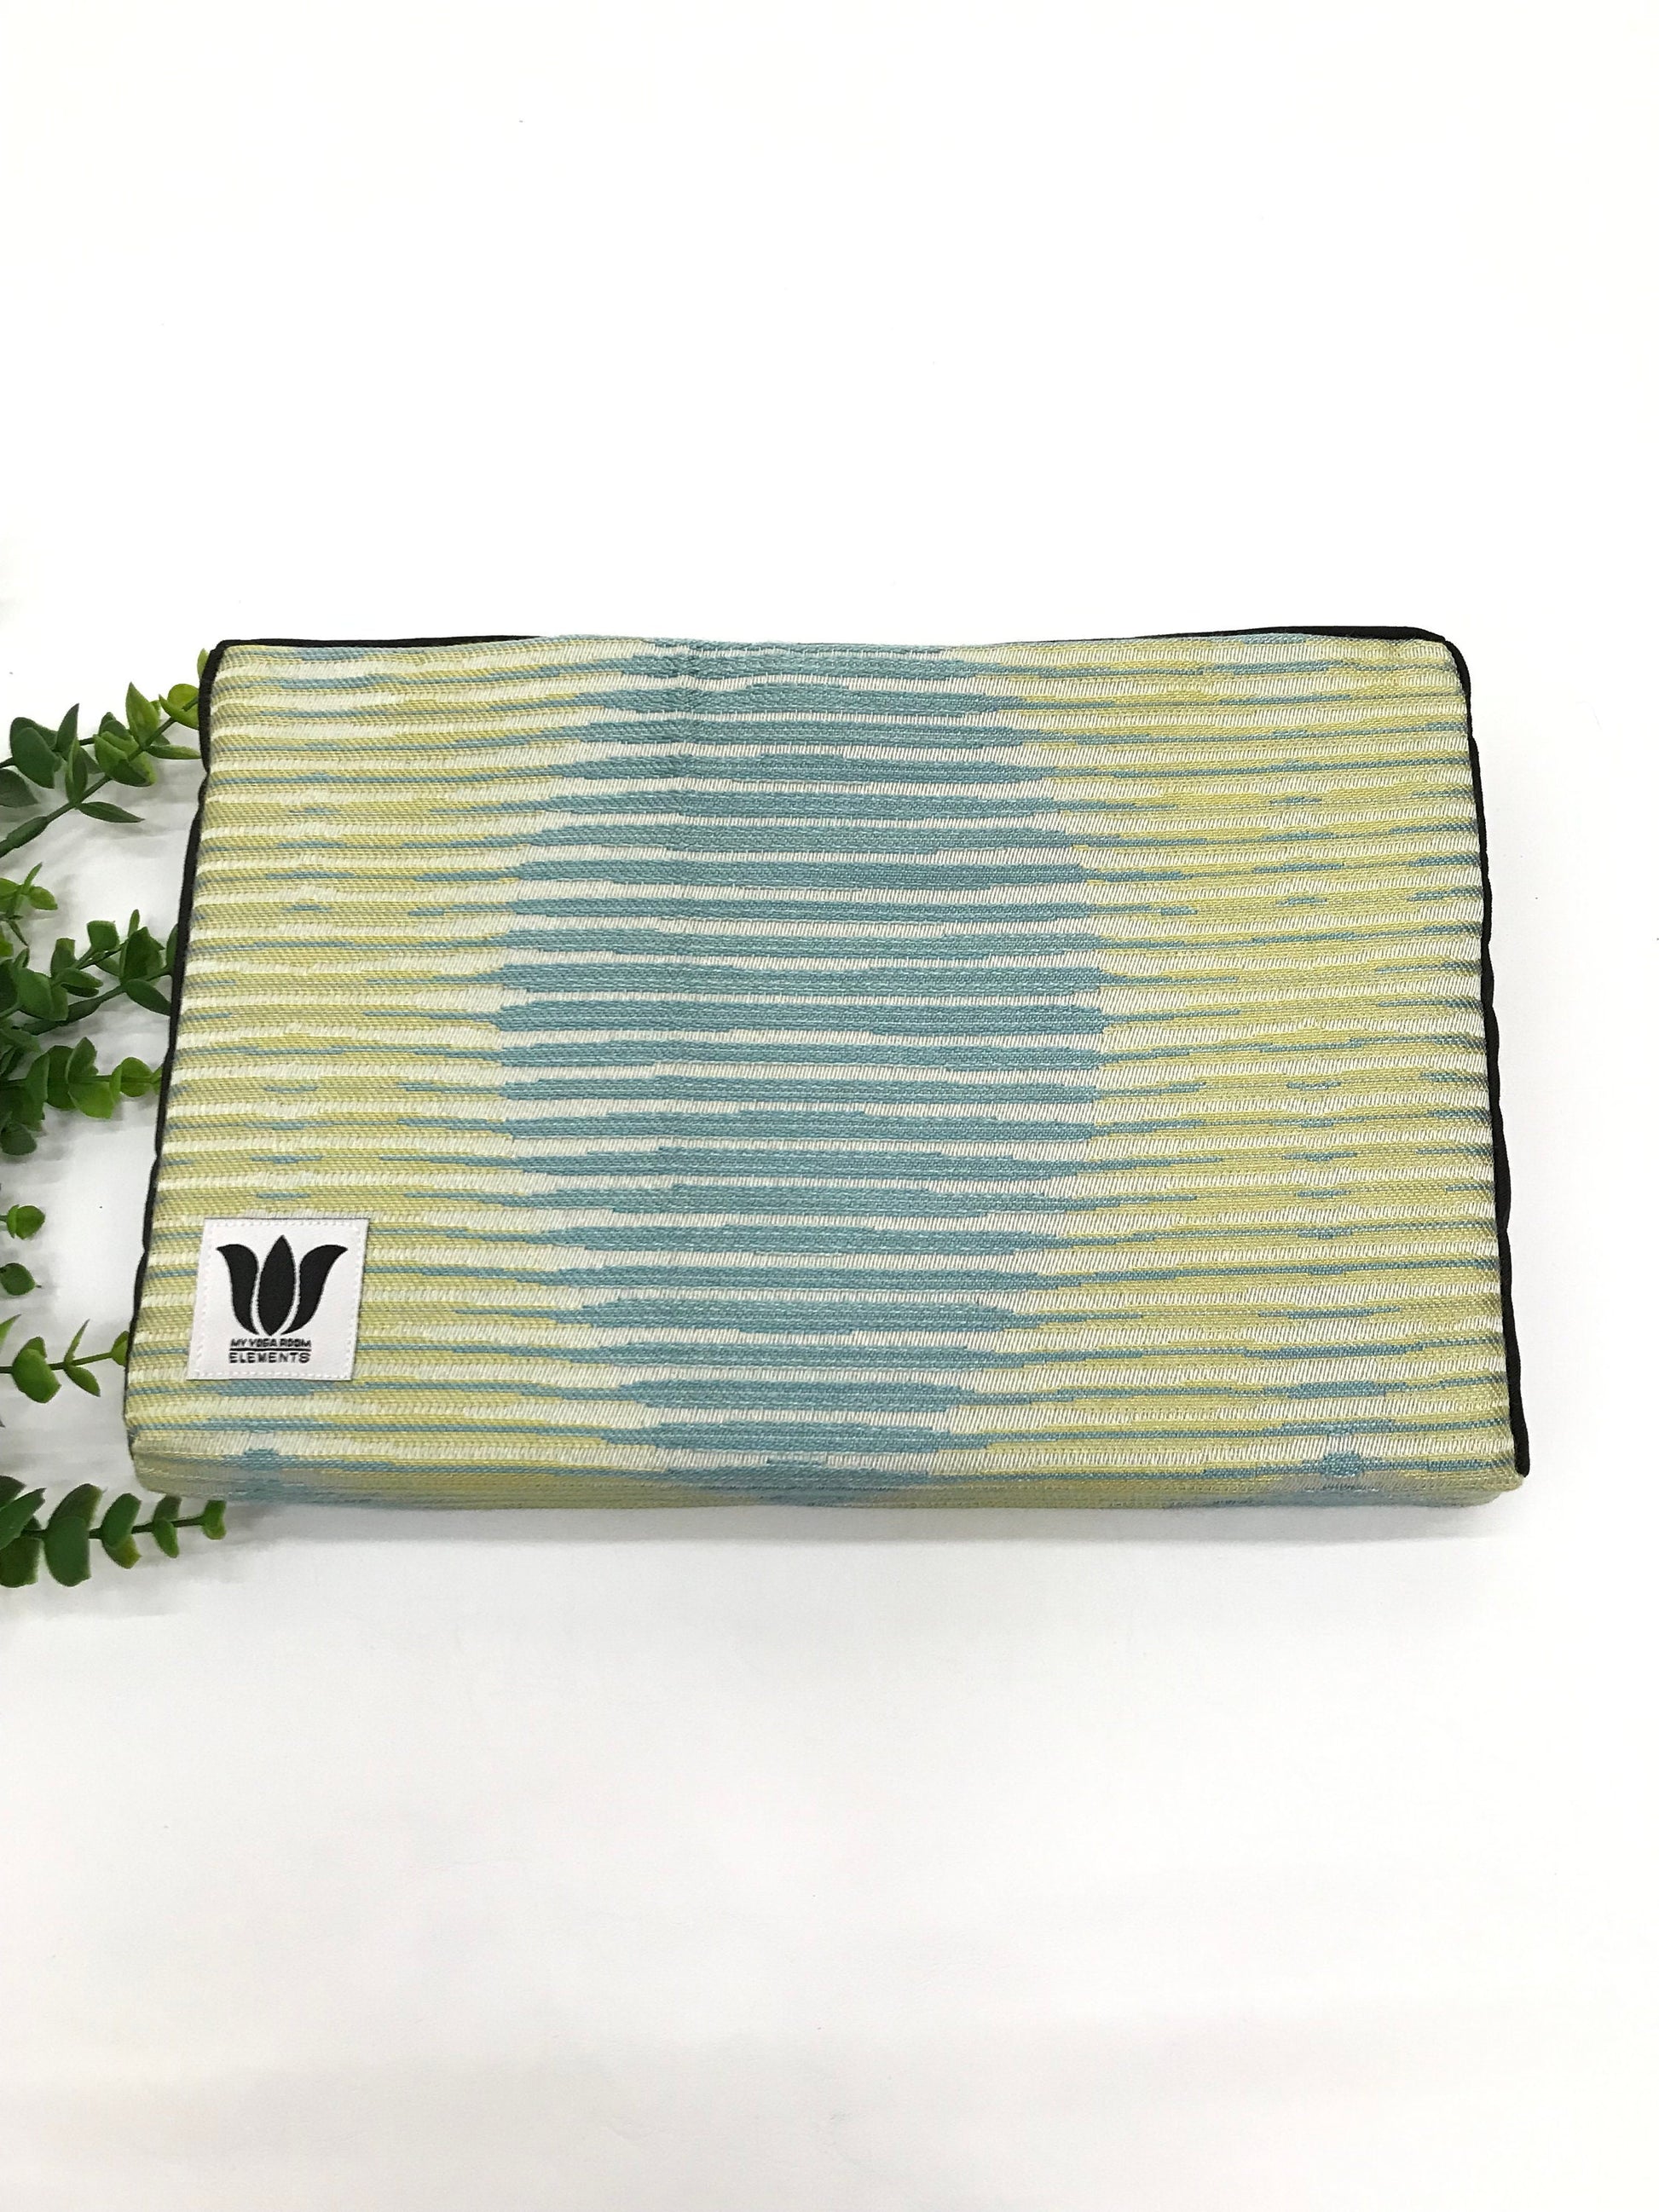 2 x 8 x 12 inch fabric covered yoga block. High density foam insert covered with green and yellow stripe patterned cotton fabric. Handcrafted in Canada by My Yoga Room Elements